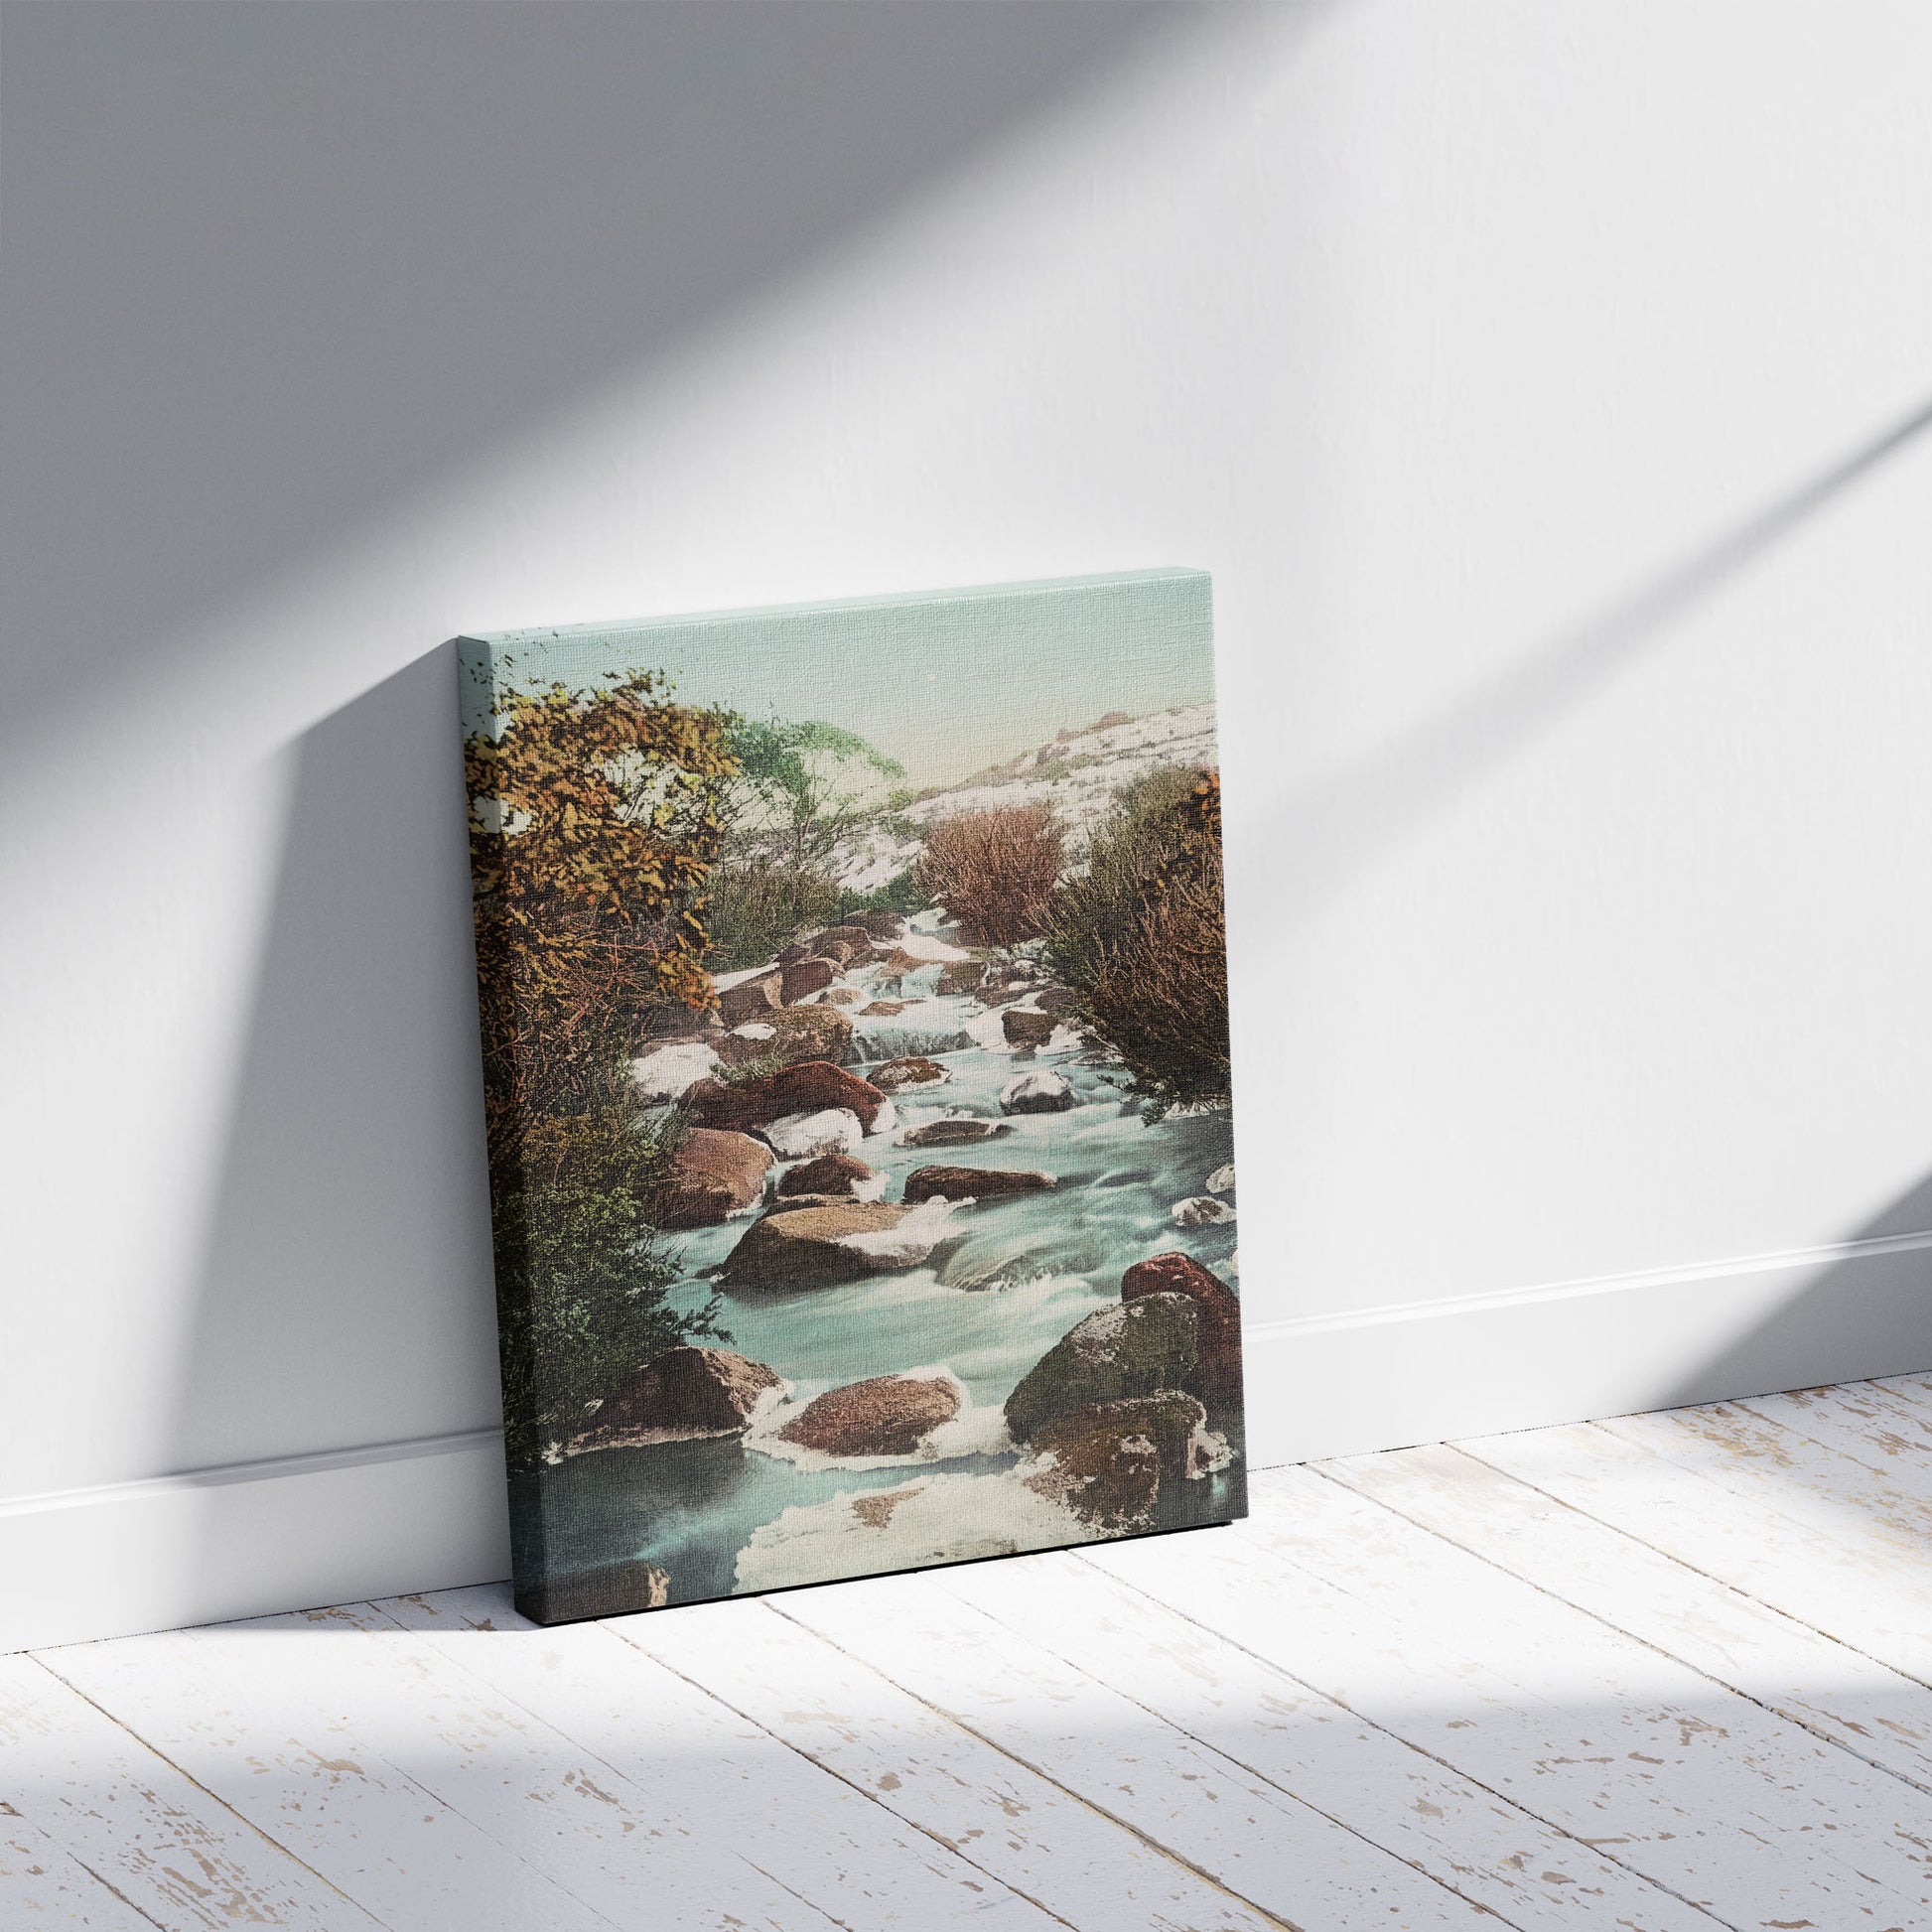 A picture of Gungarline Creek, Snowy River. N.S.W., a mockup of the print leaning against a wall